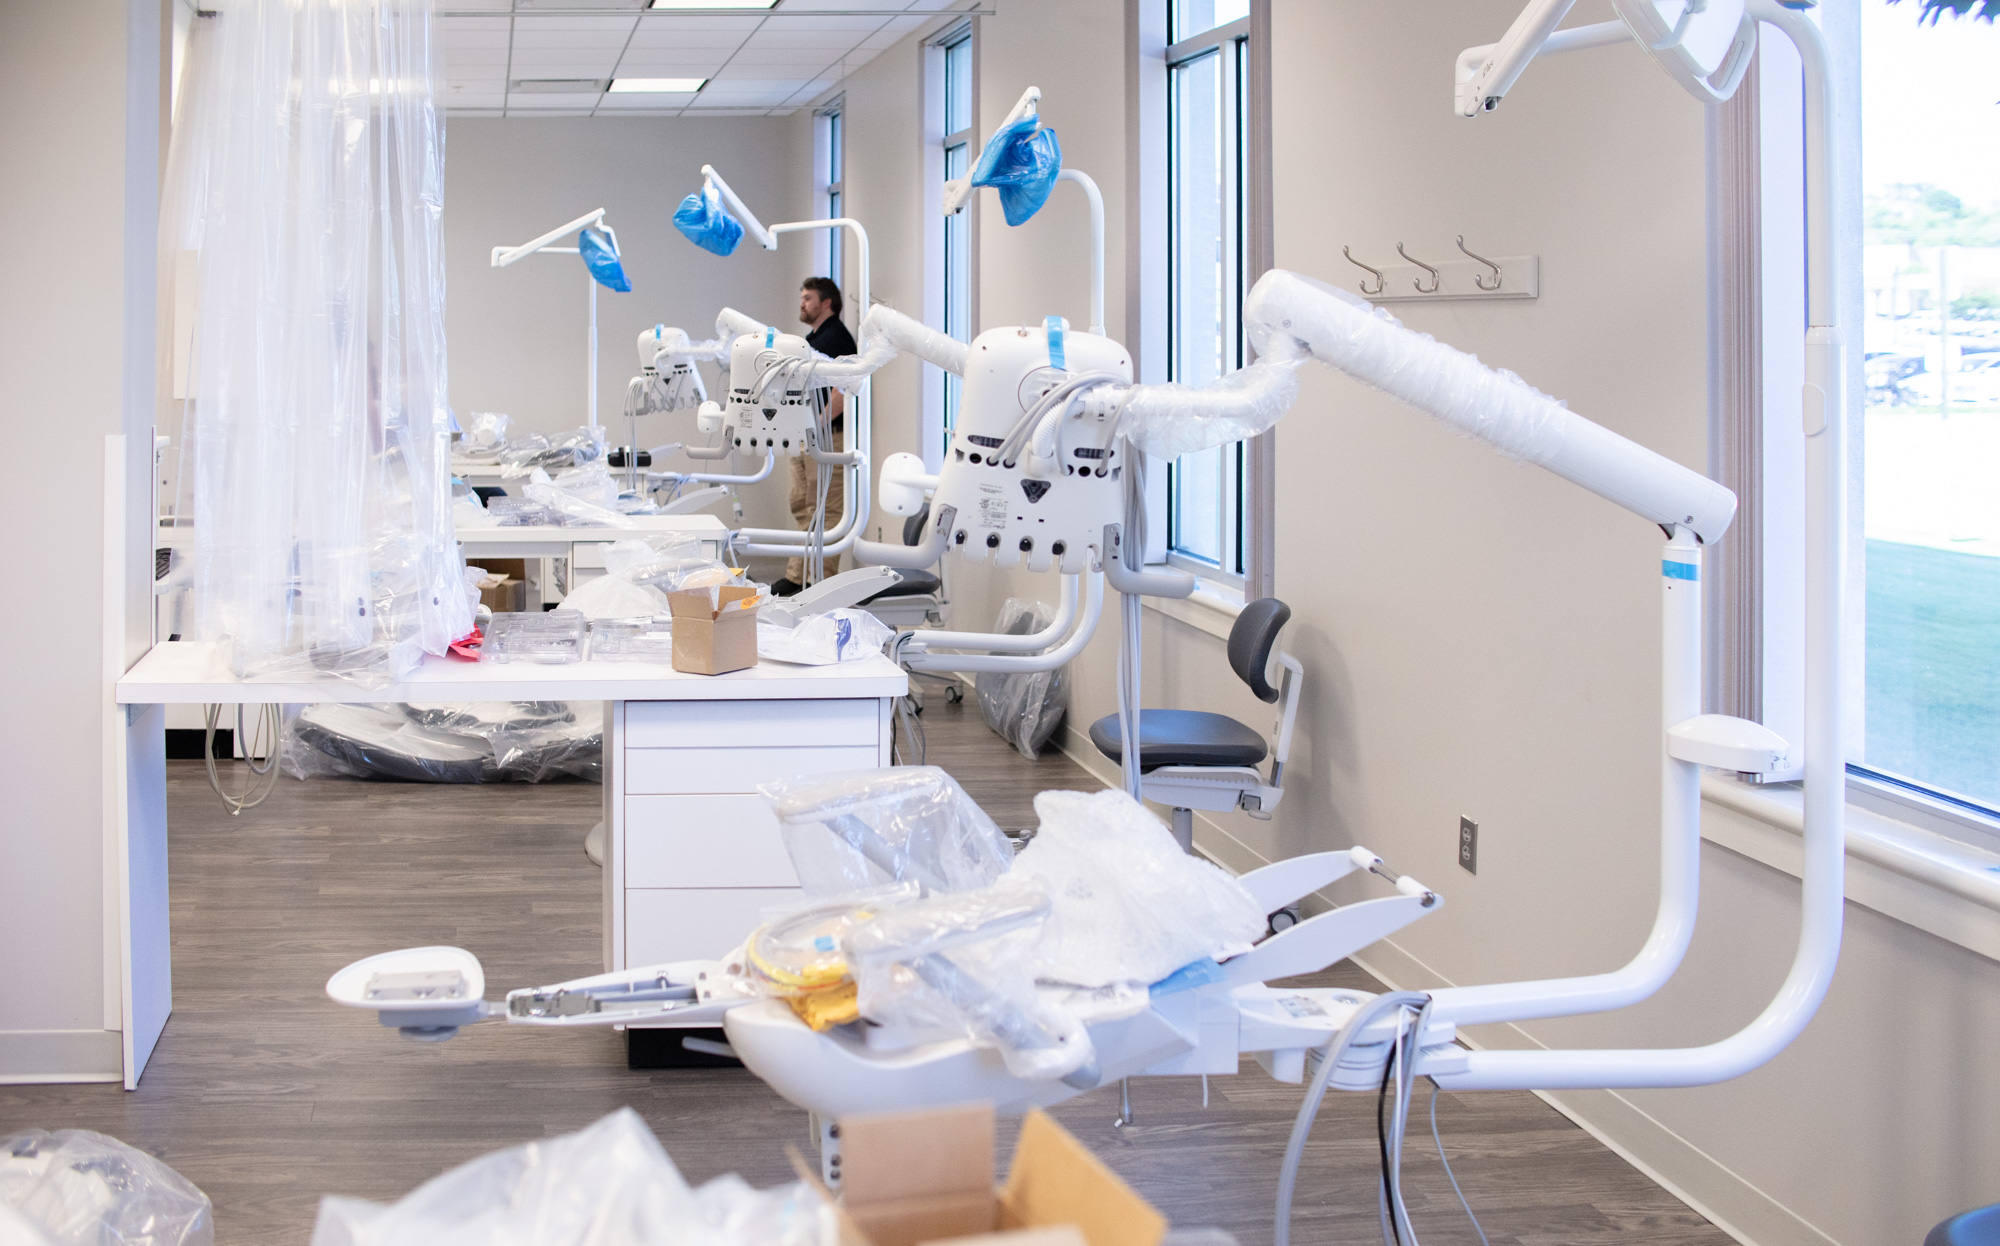 Dental Hygiene Chairs are Installed